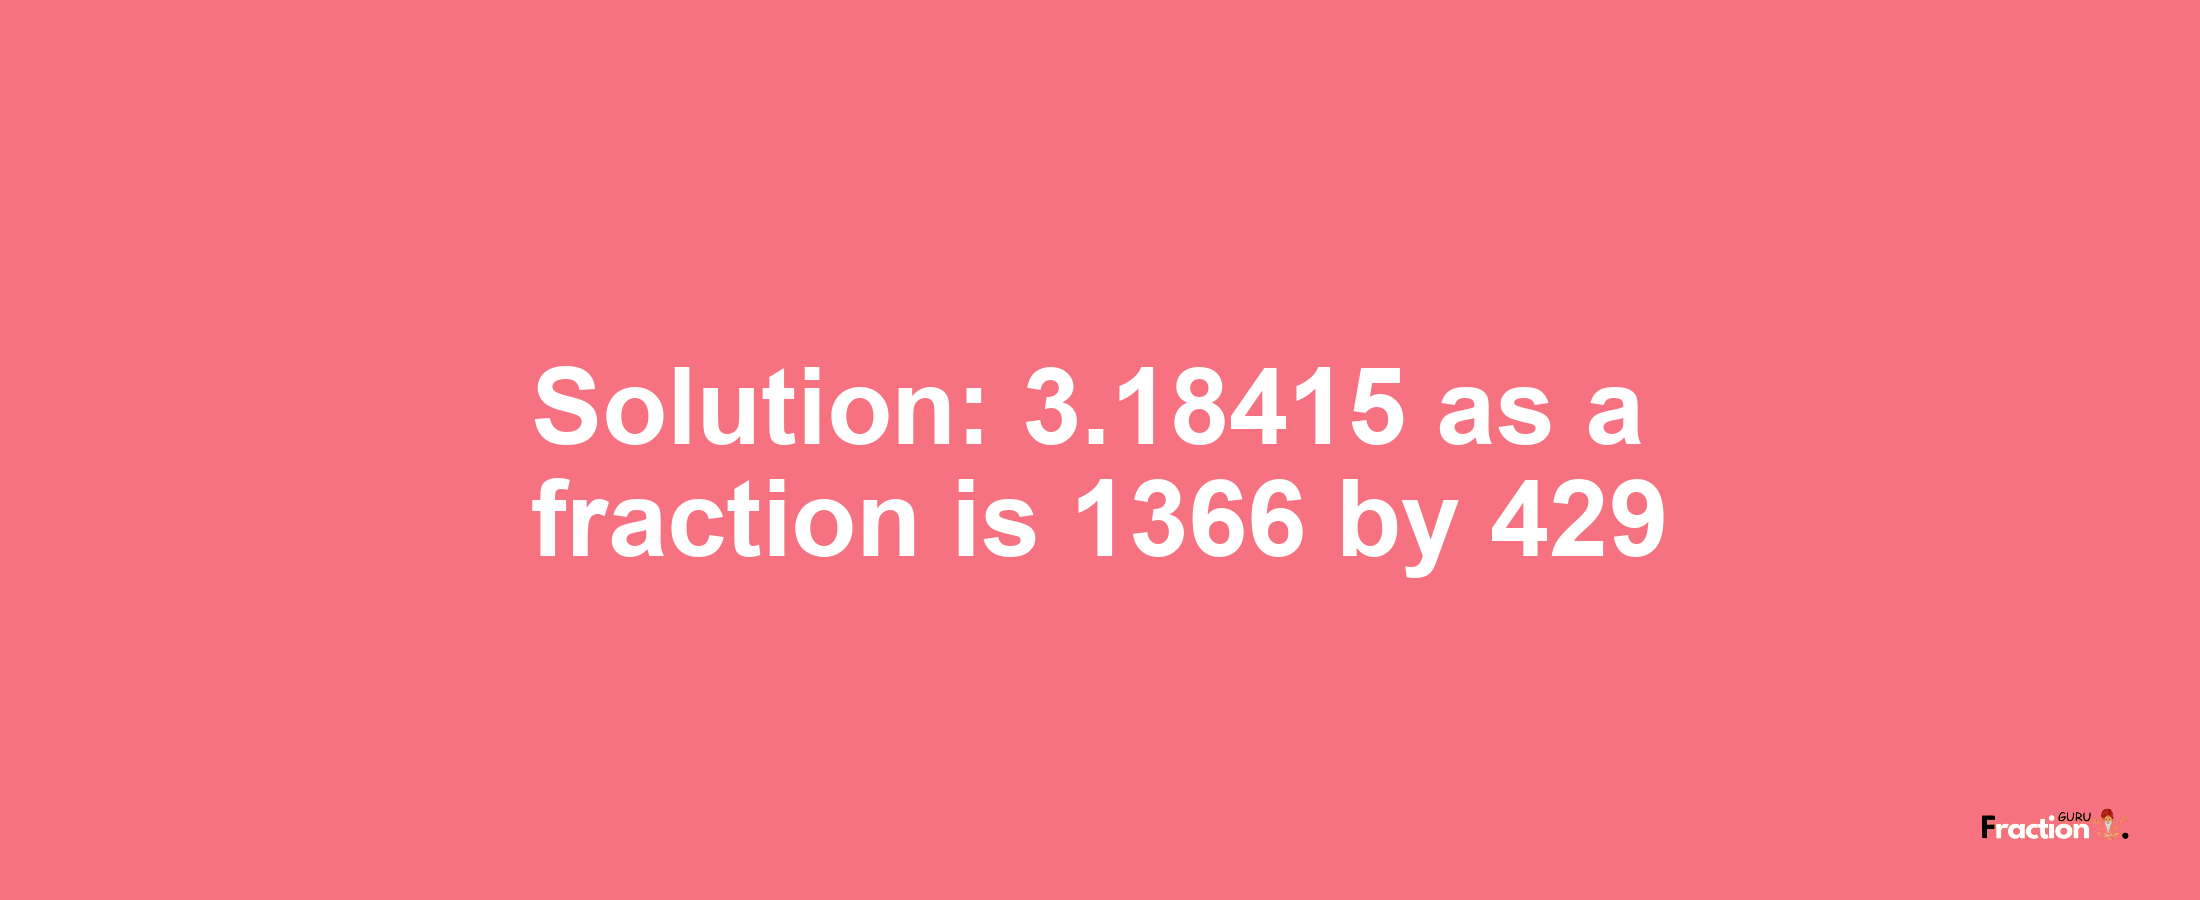 Solution:3.18415 as a fraction is 1366/429